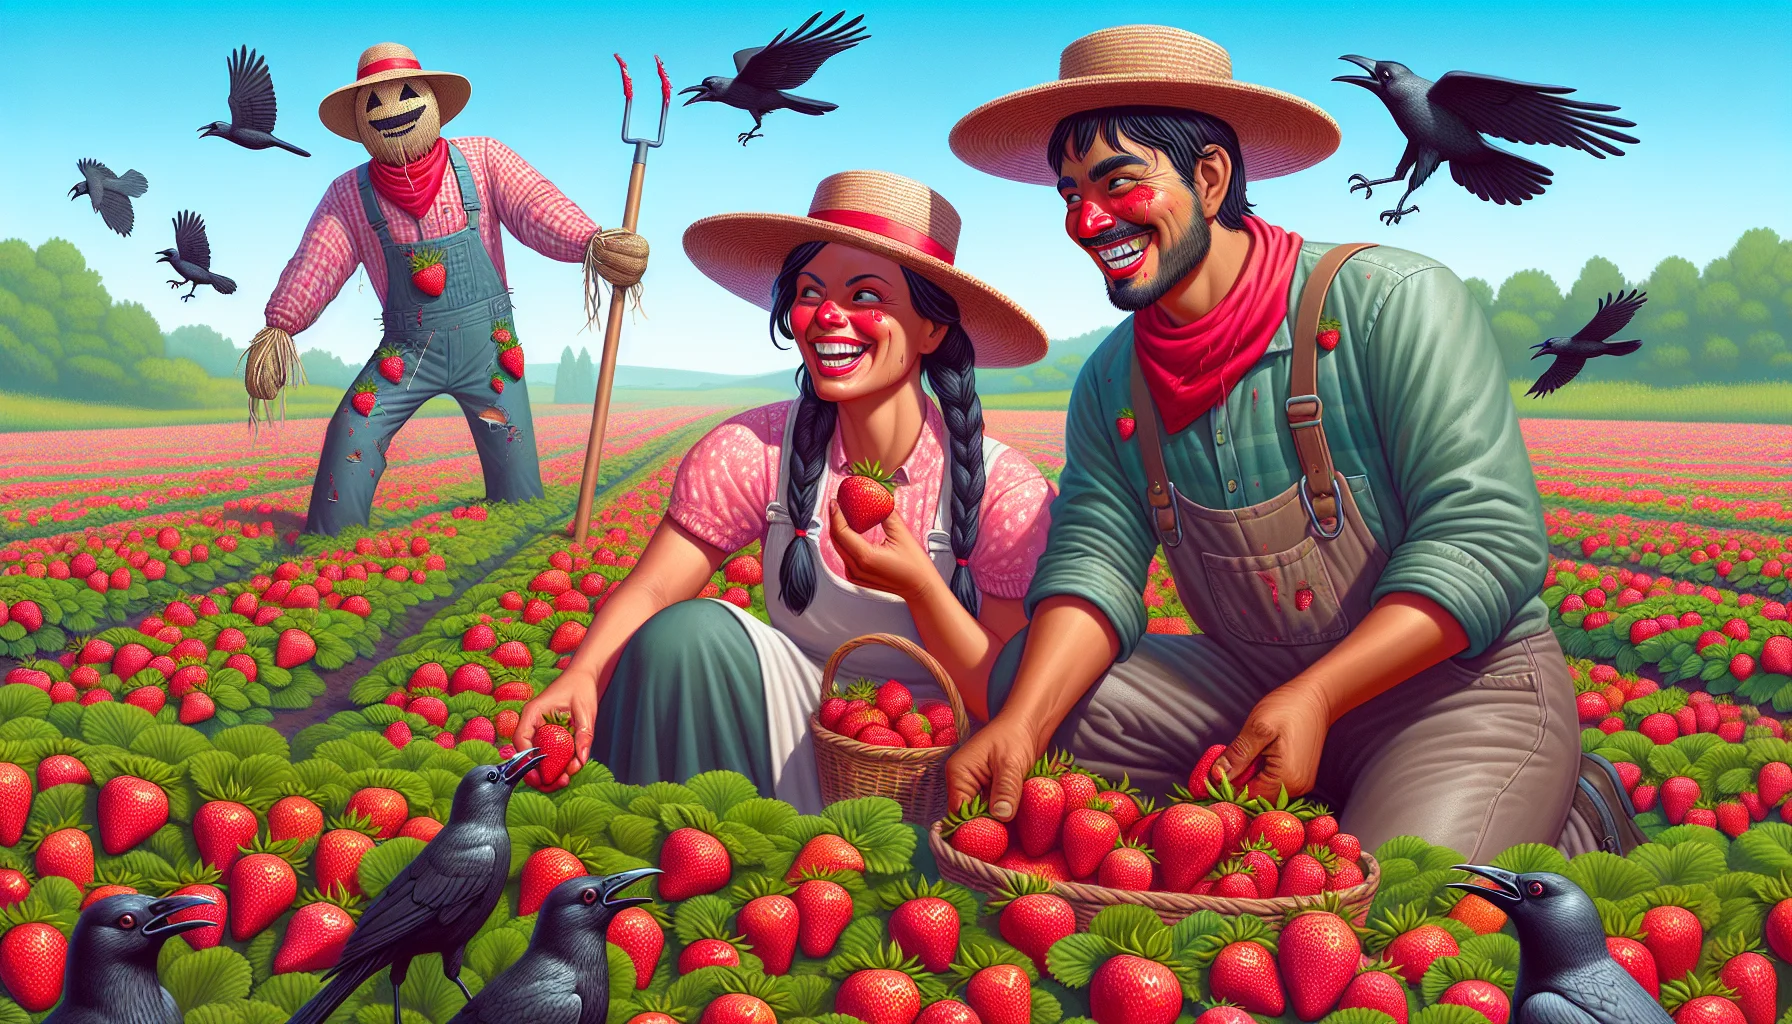 Imagine a humorous scene taking place in a vibrant strawberry field. A Caucasian female farmer and a Hispanic male farmer are kneeling down, picking ripe red strawberries. They wore straw hats to protect themselves from the summer sun, and their faces were smeared with strawberry juice, making it look like they had echoic red lipstick and rouge on. A group of crows nearby attempt to steal the fruits but the clever scarecrow wearing the farmer's old clothing keeps them at bay causing a funny spectacle. This light-hearted image encourages the joy of gardening.